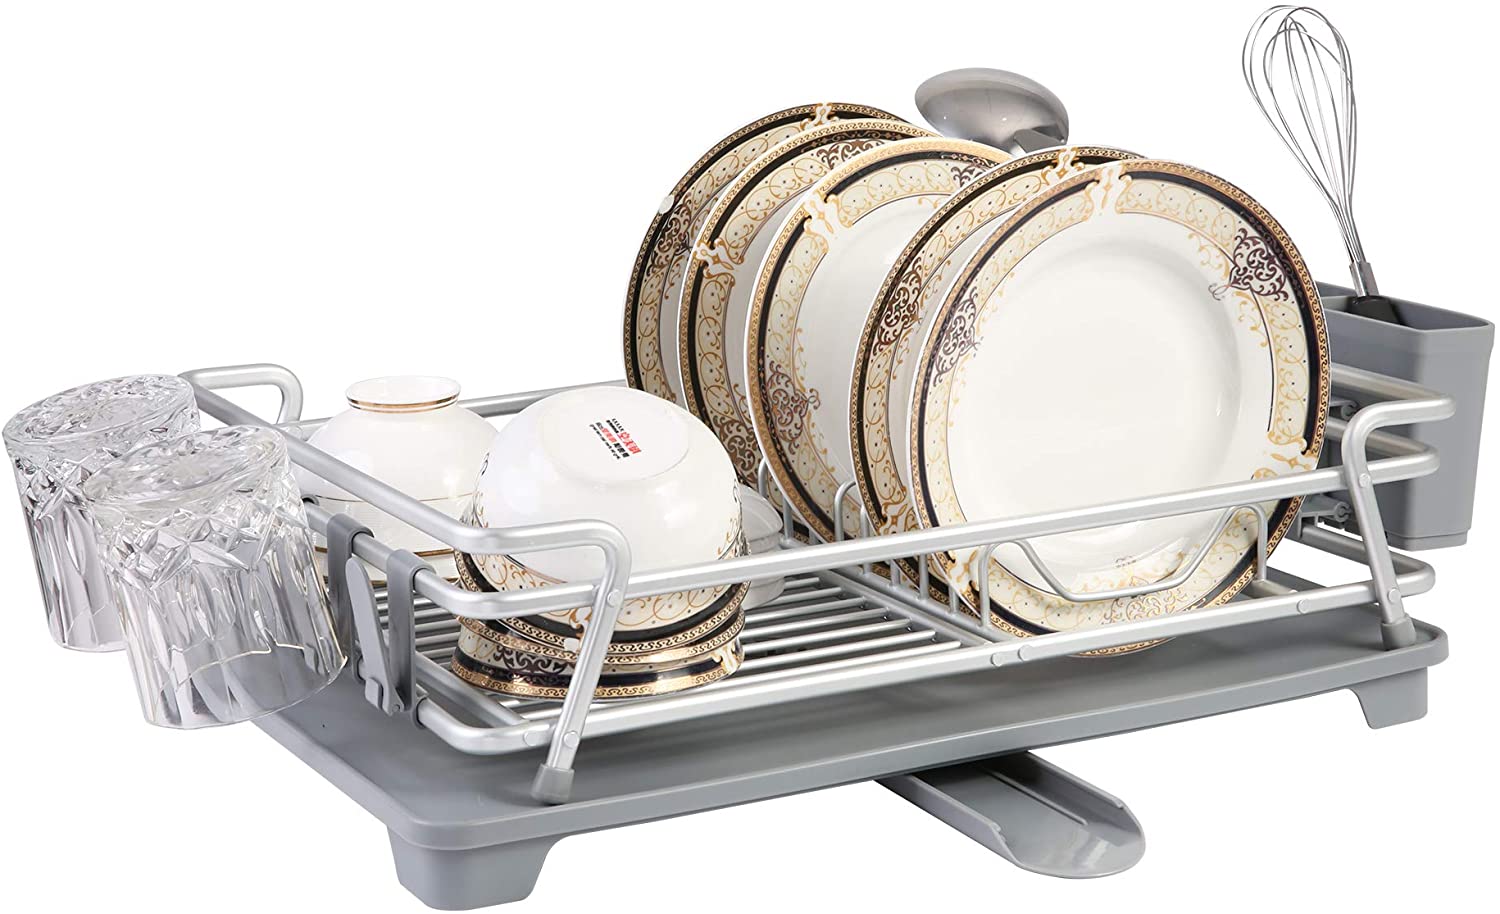 Dish Drying Rack with Swivel Spout